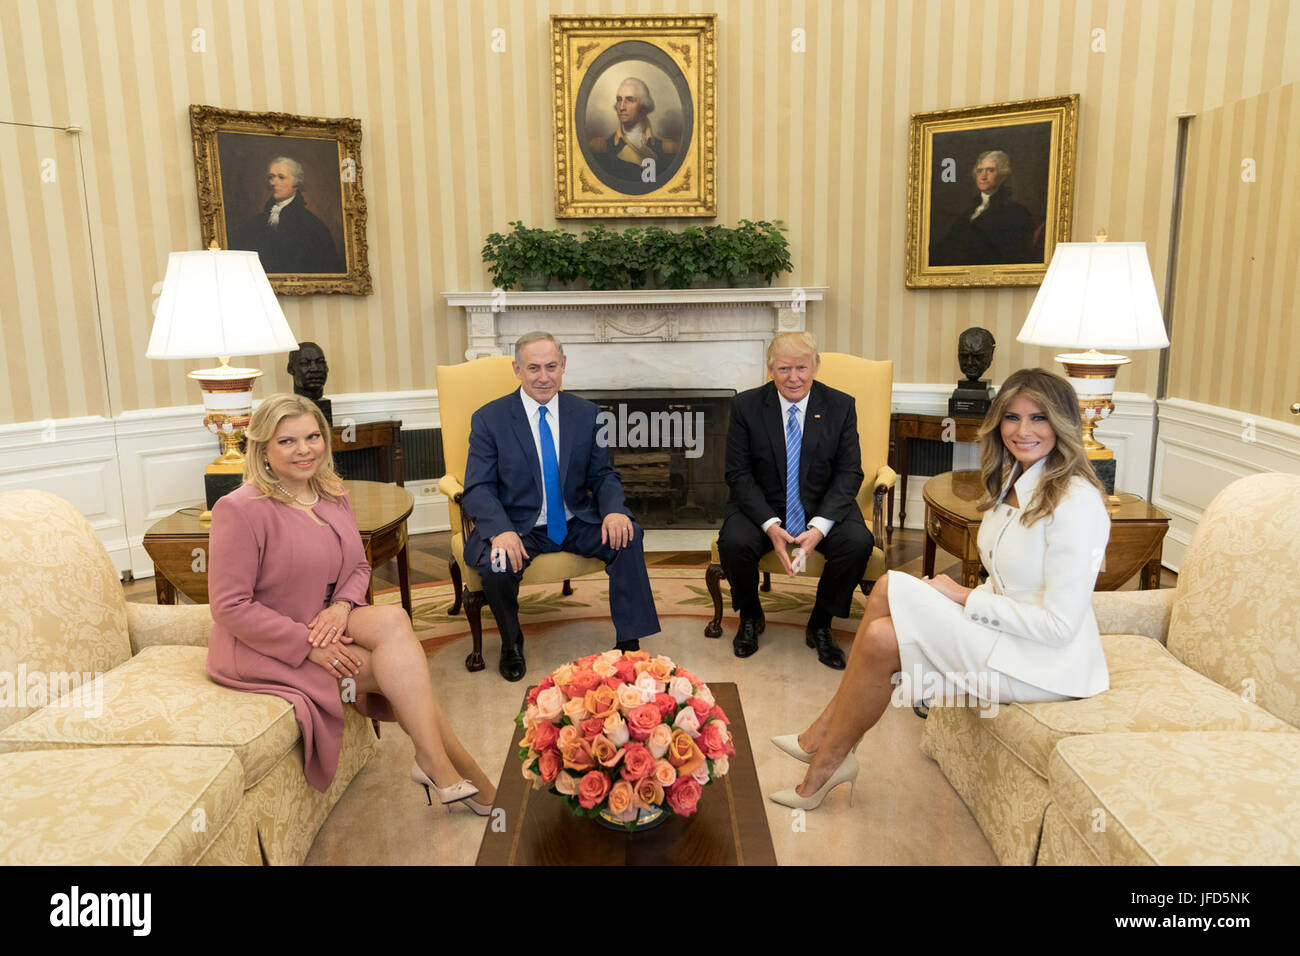 President Donald Trump and First Lady Melania Trump meet with Israeli Prime Minister Benjamin Netanyahu, and his wife, Mrs. Sara Netanyahu, Wednesday, Feb. 15, 2017, in the Oval Office at the White House in Washington, D.C. (Official White House Photo by Shealah Craighead) Stock Photo